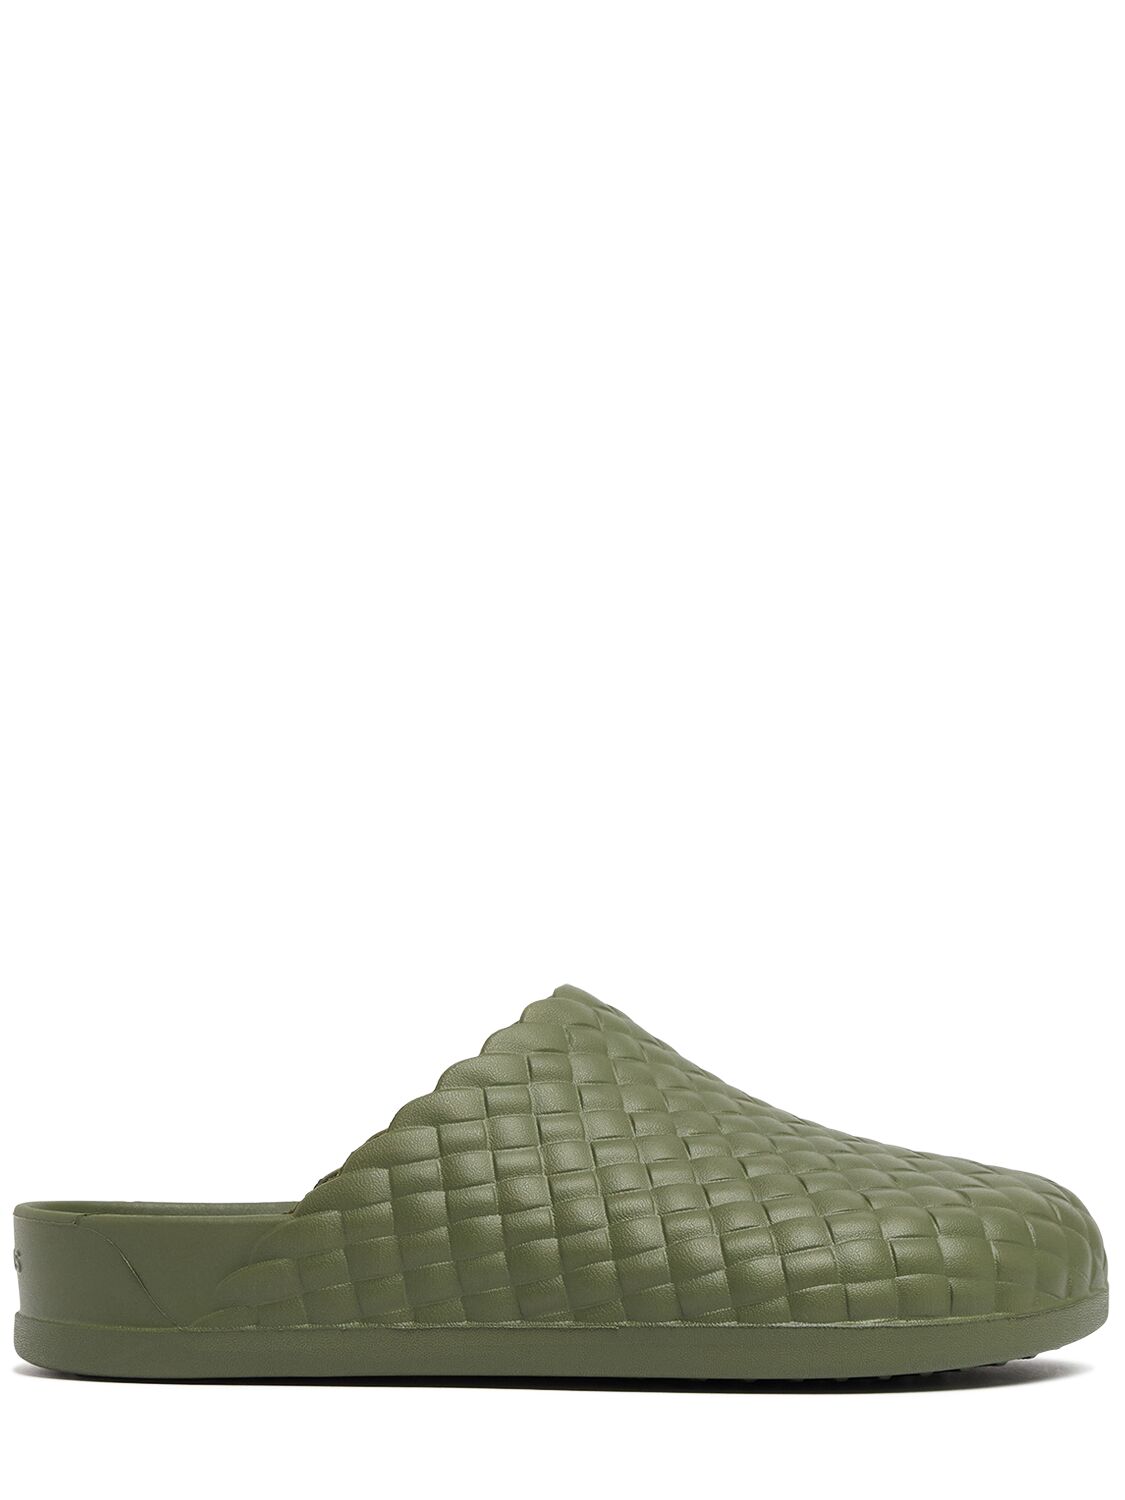 Crocs Dylan Woven Rubber Clogs In Army Green